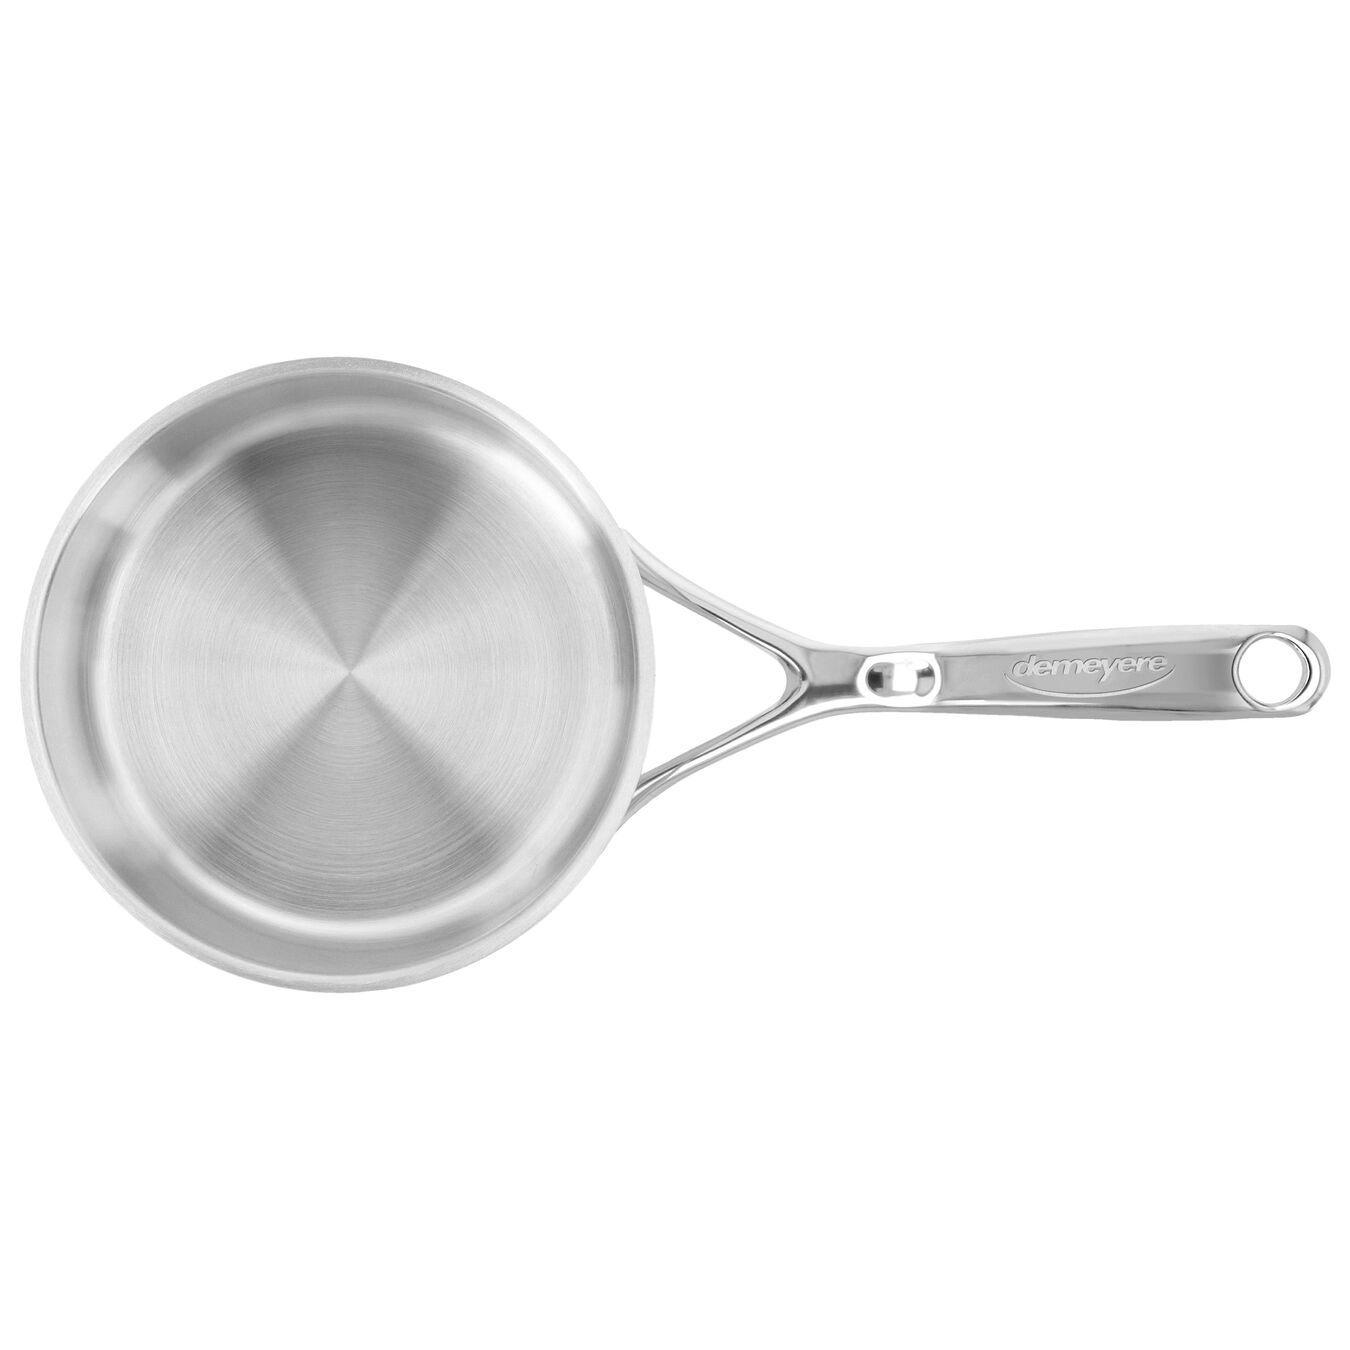 16 cm 18/10 Stainless Steel Saucepan without lid silver,,large 2